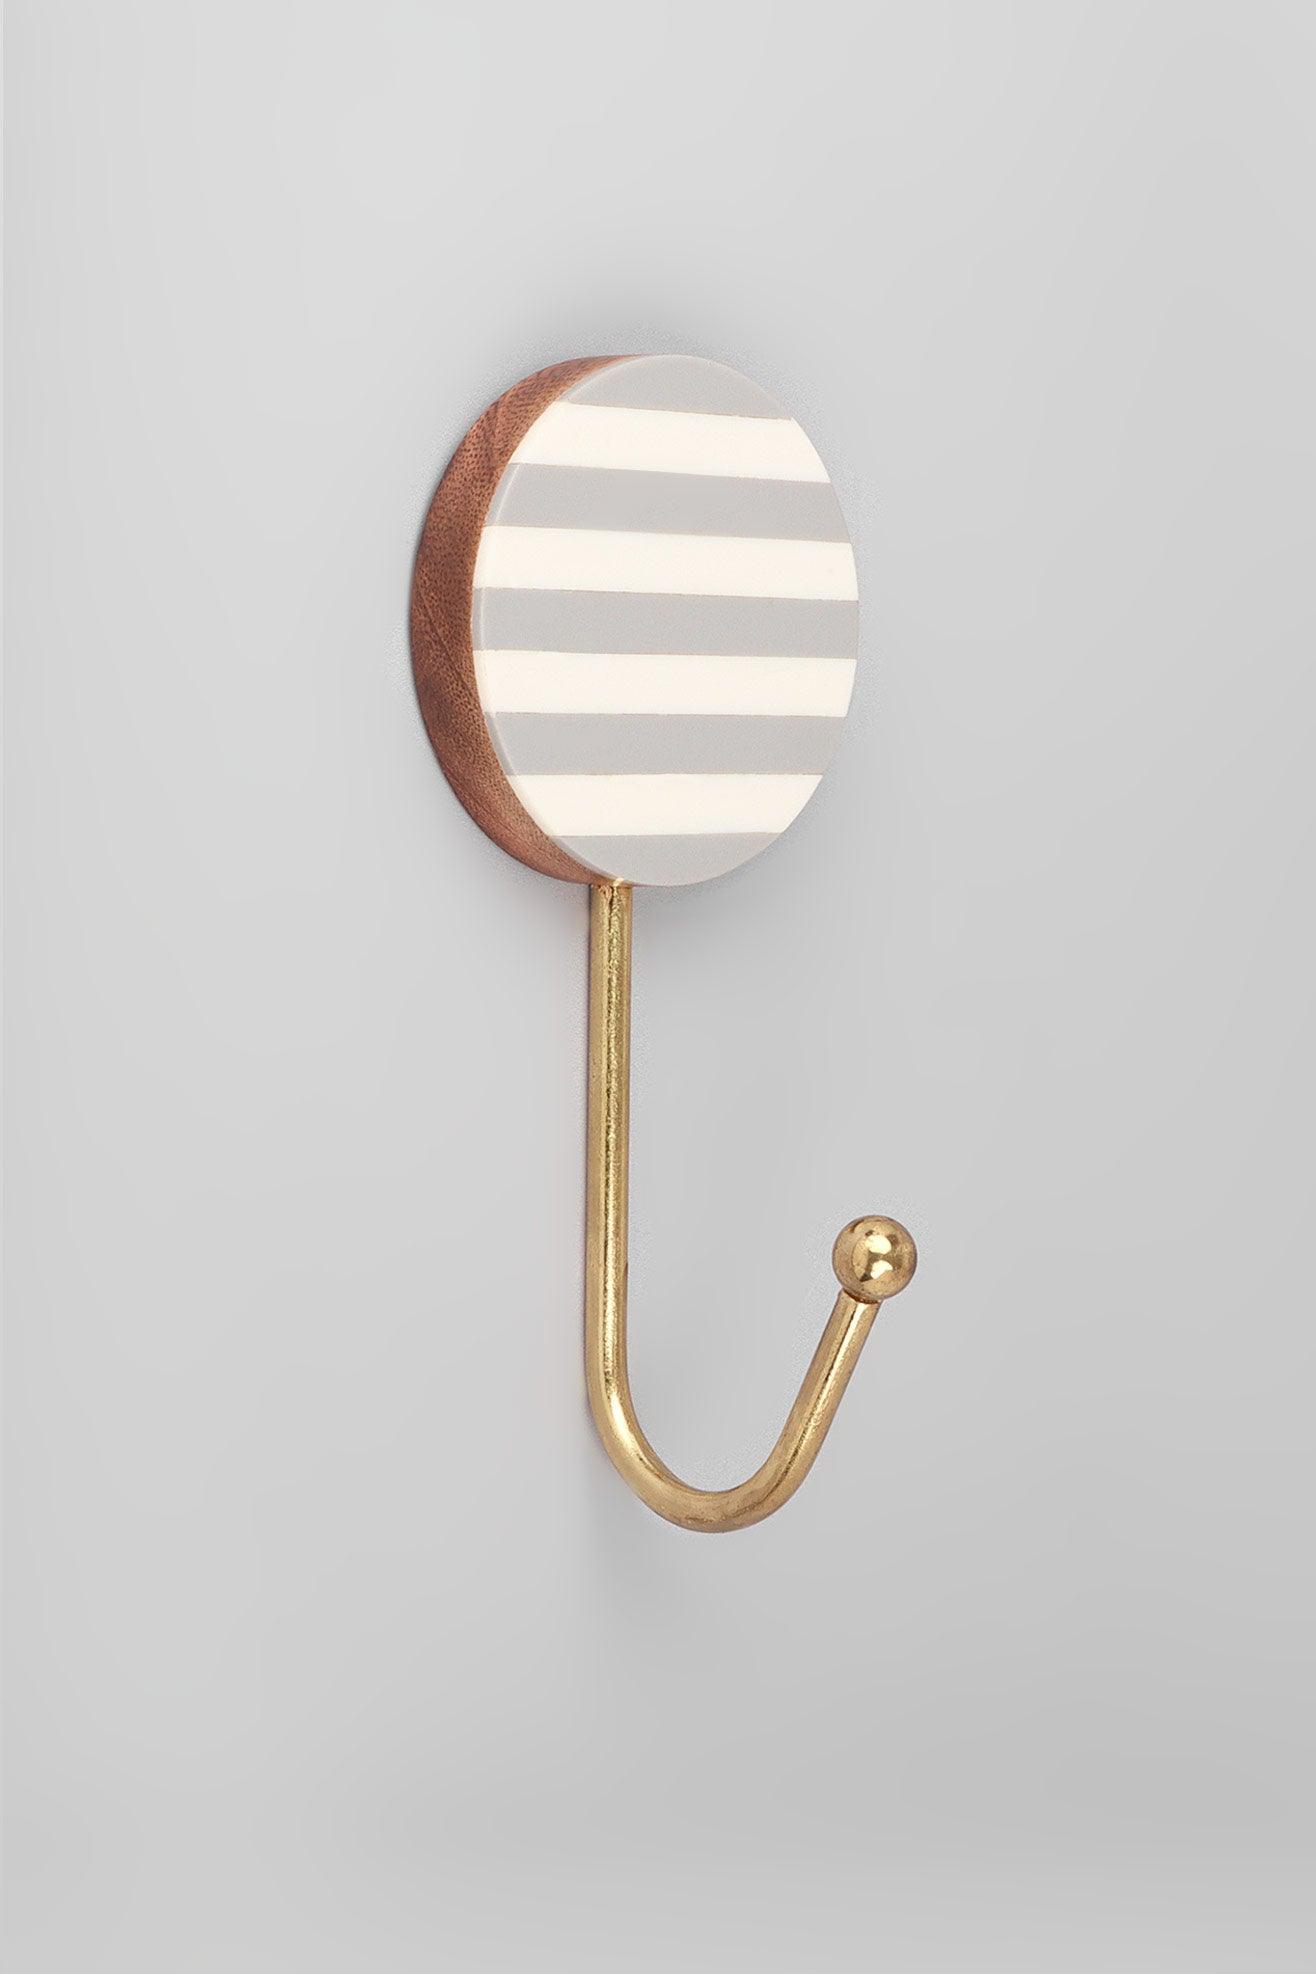 Gdecorstore All Hooks G Decor White Grey Striped Large Circle Disk Wood and Resin Brass Geometric Wall Organizer Coat Hook